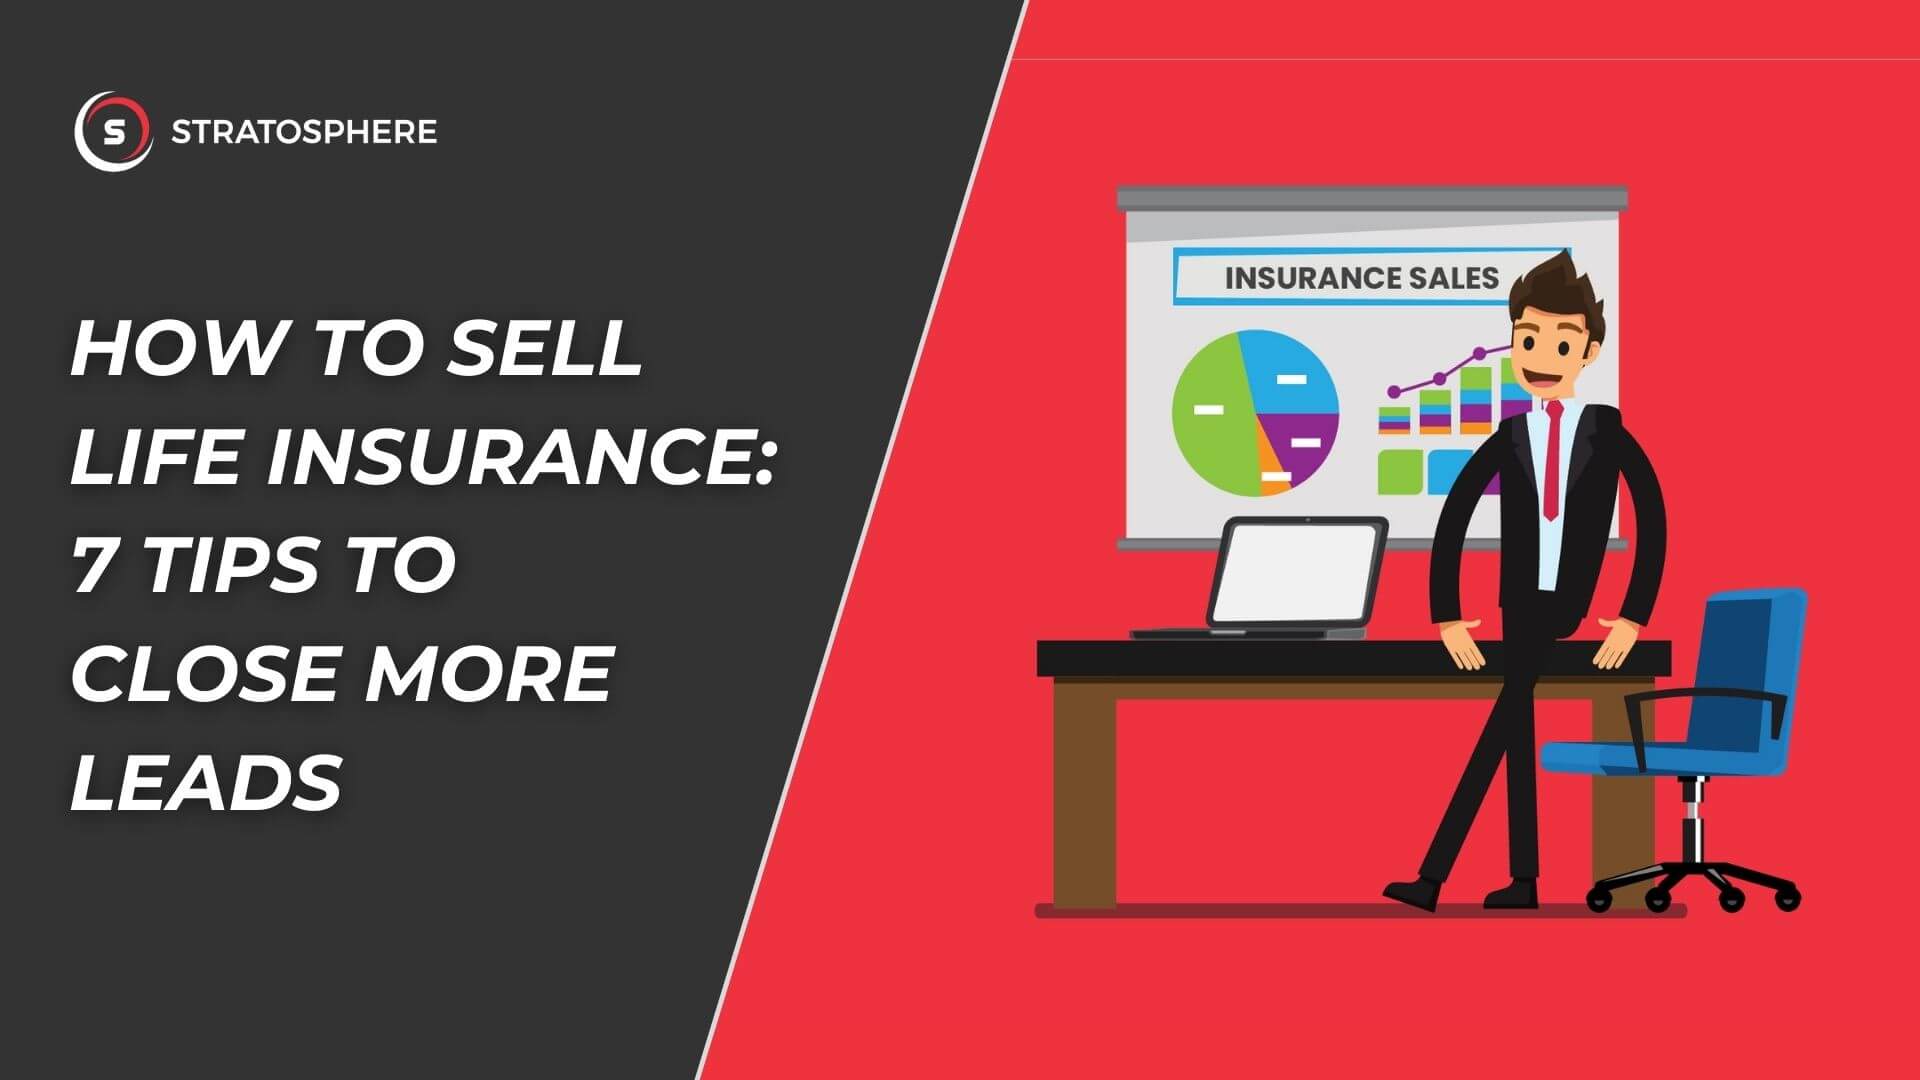 How to Sell Life Insurance: 7 Tips to Close More Leads